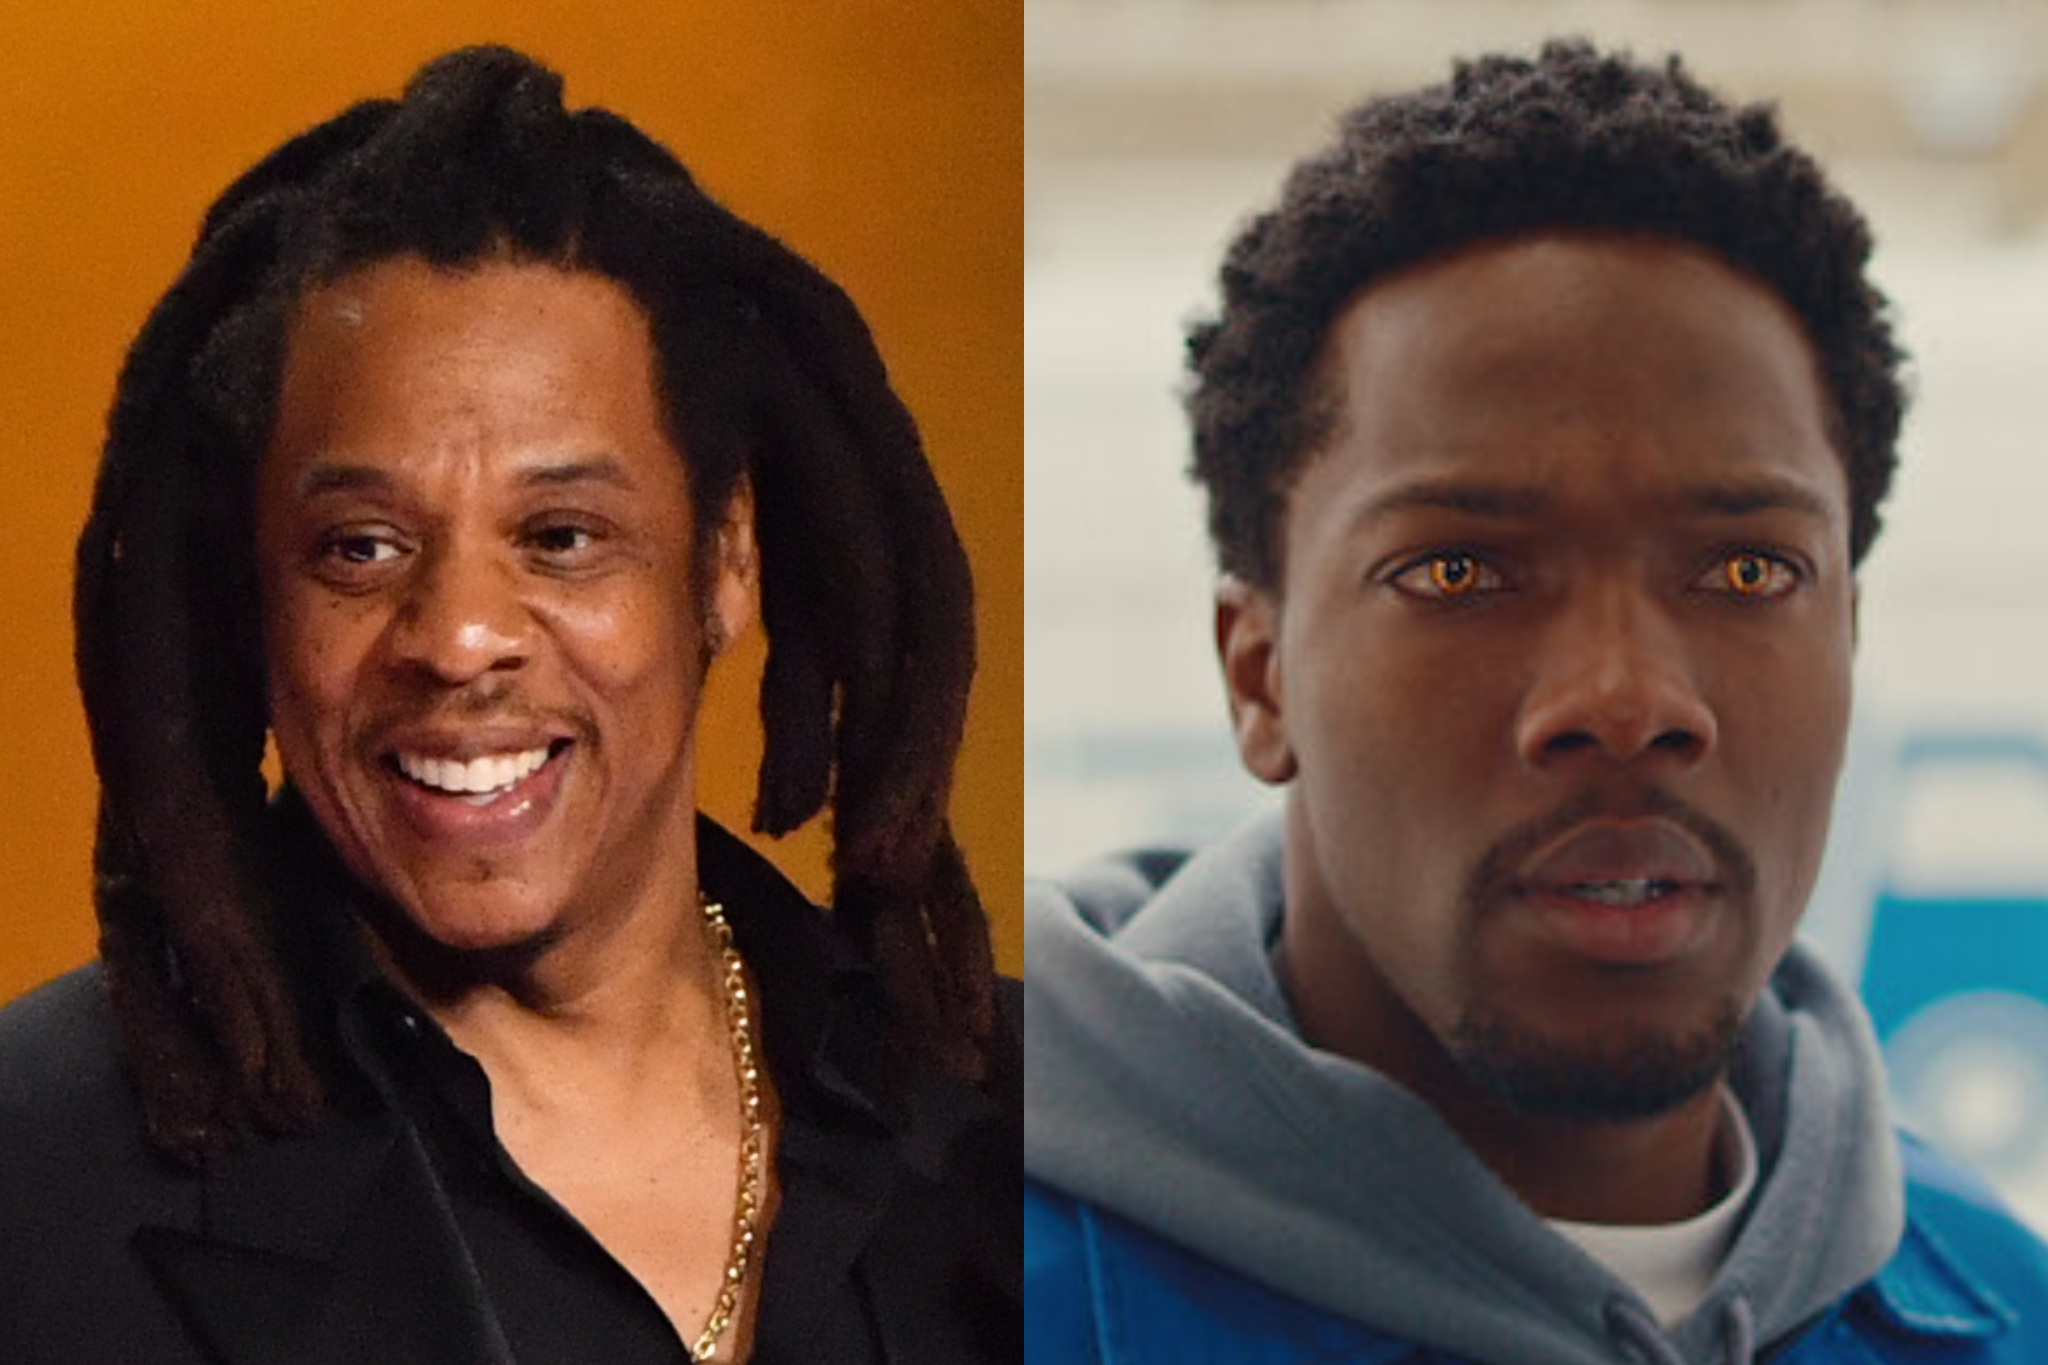 jay-z, rapman, tosin cole, jay-z raves about ‘crazy’ new netflix sci-fi series starring former doctor who companion